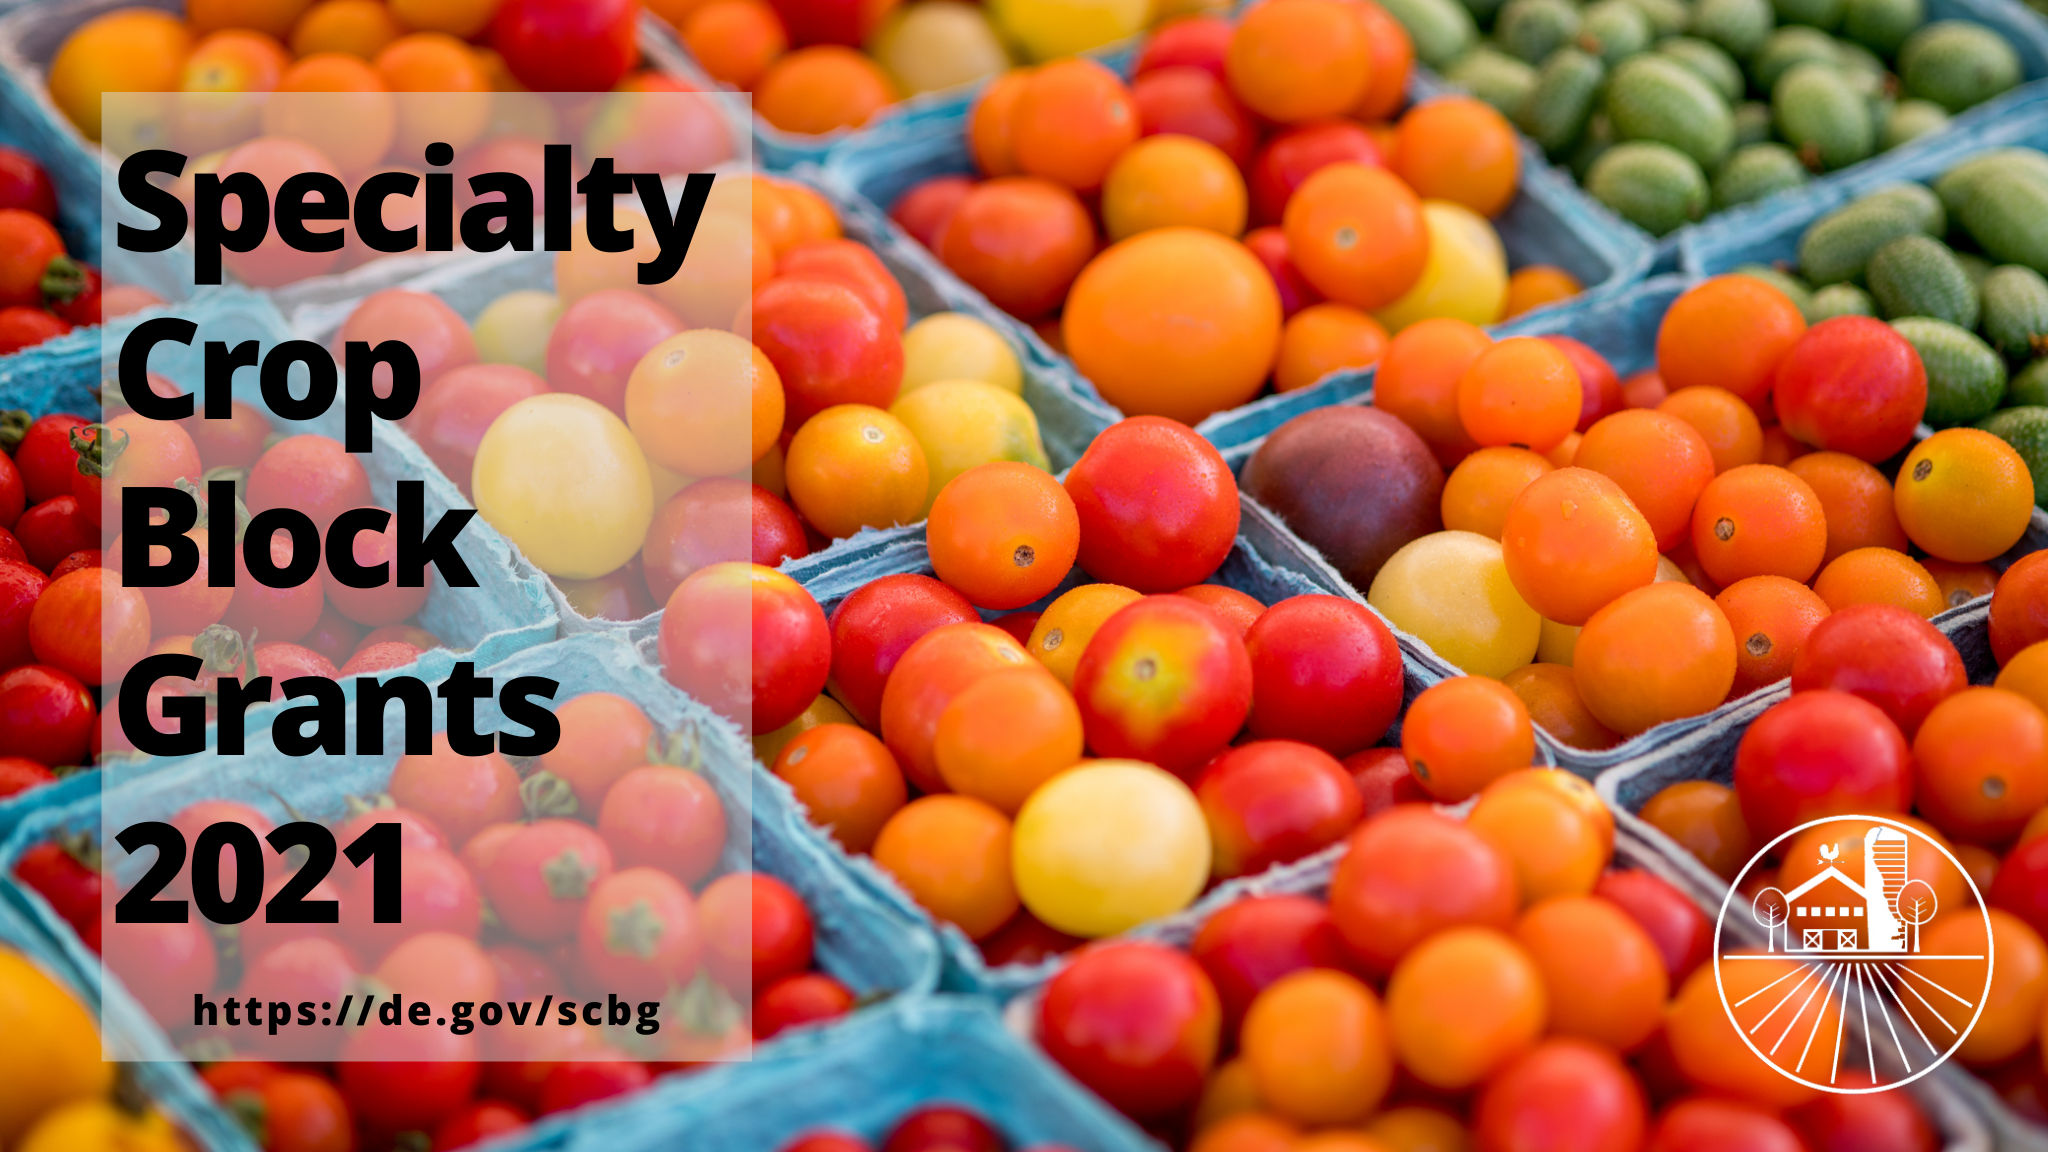 cherry tomatoes with the text Specialty Crop Block Grants 2021 overlayed with website https://de.gov/scbg